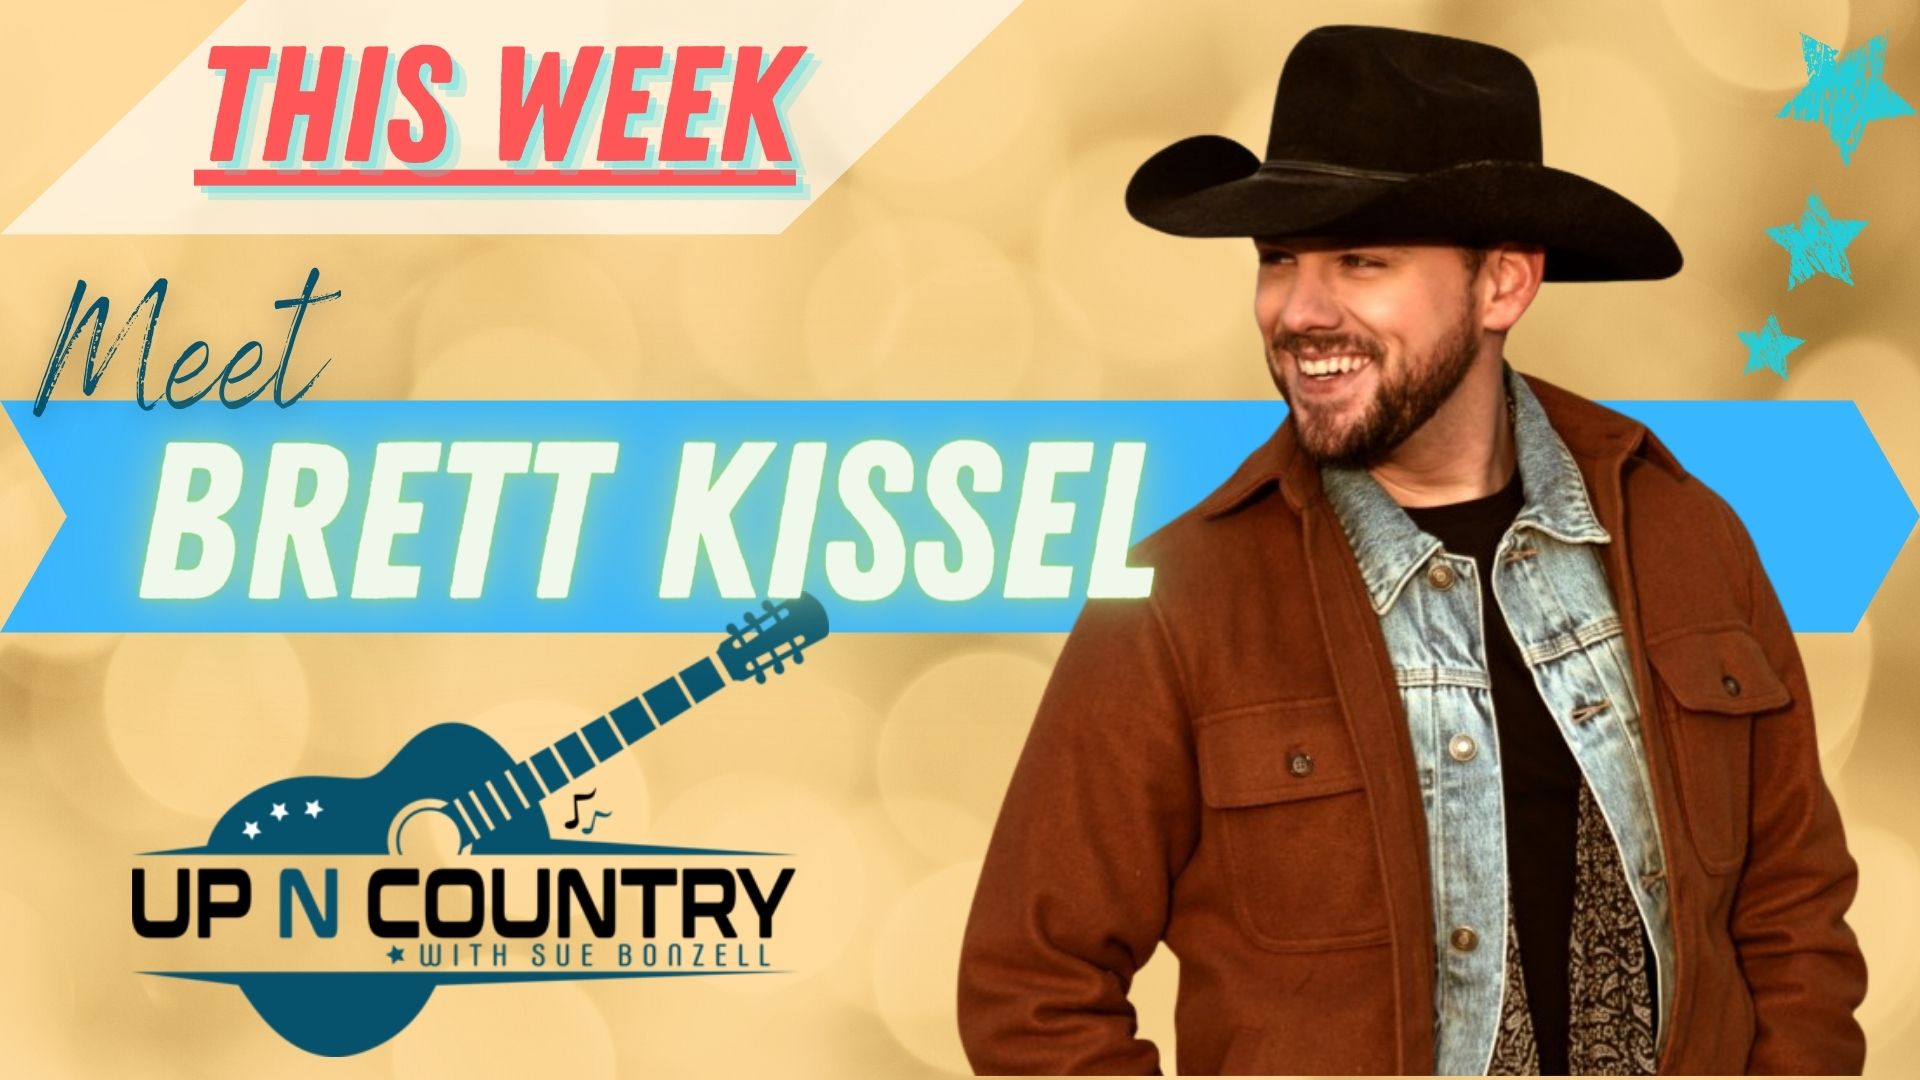 Interview with Brett Kissel Up N Country